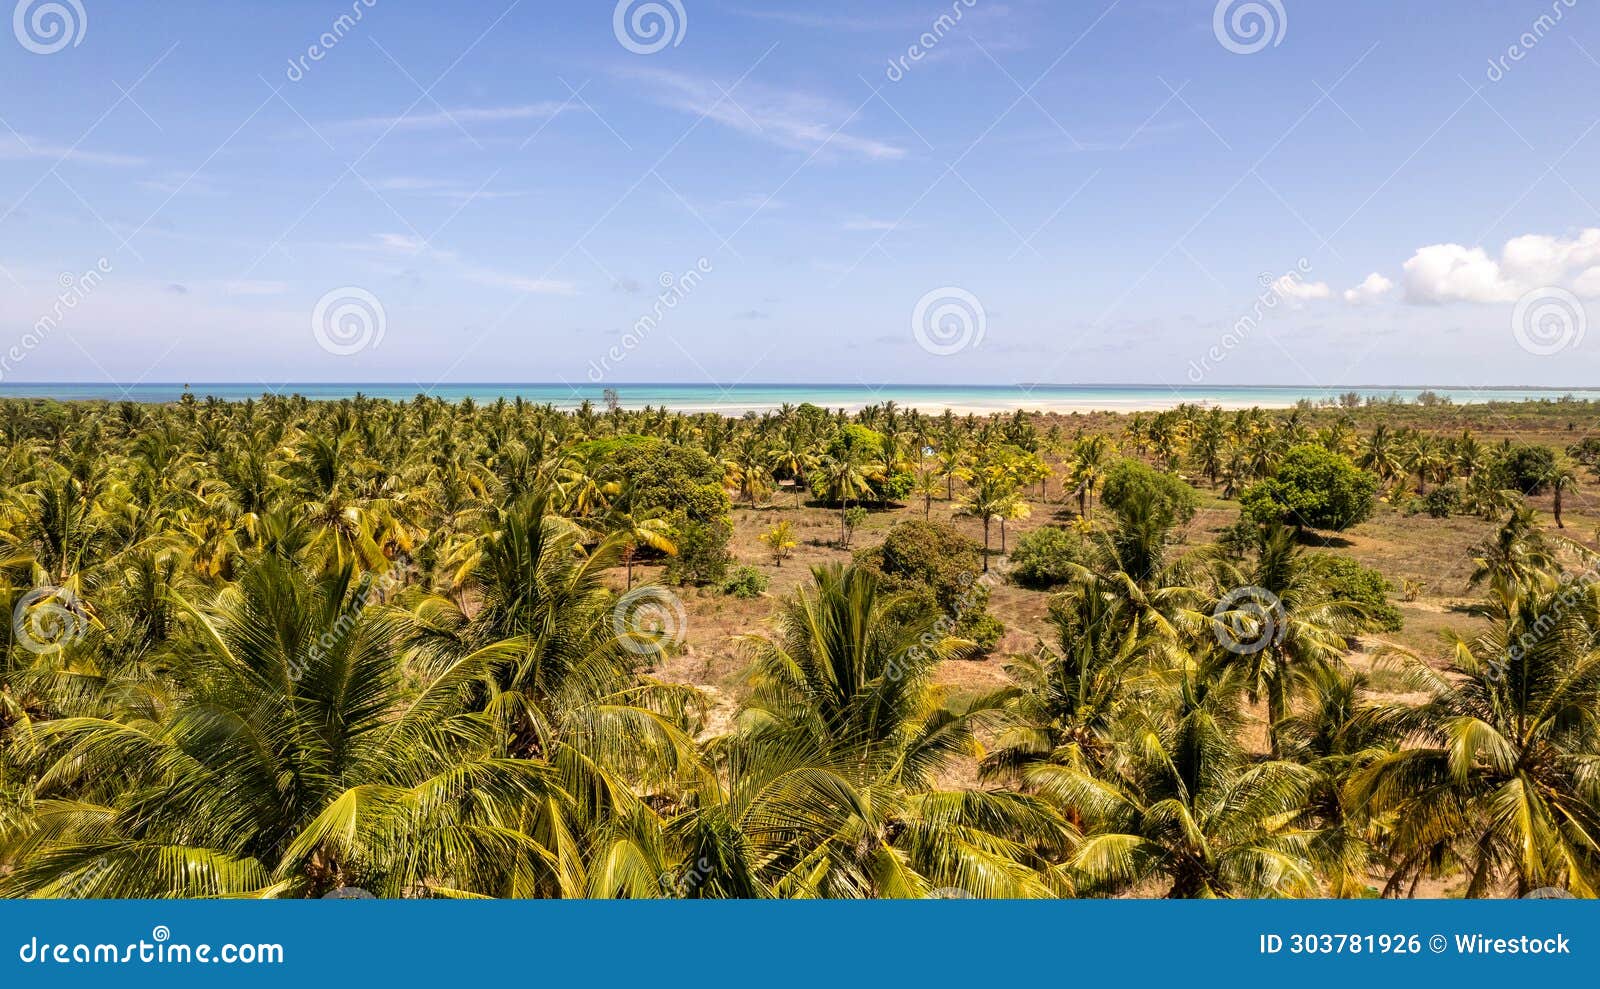 stunning view captures the beauty of a tropical paradise in quionga in cabo delgado, mozambique